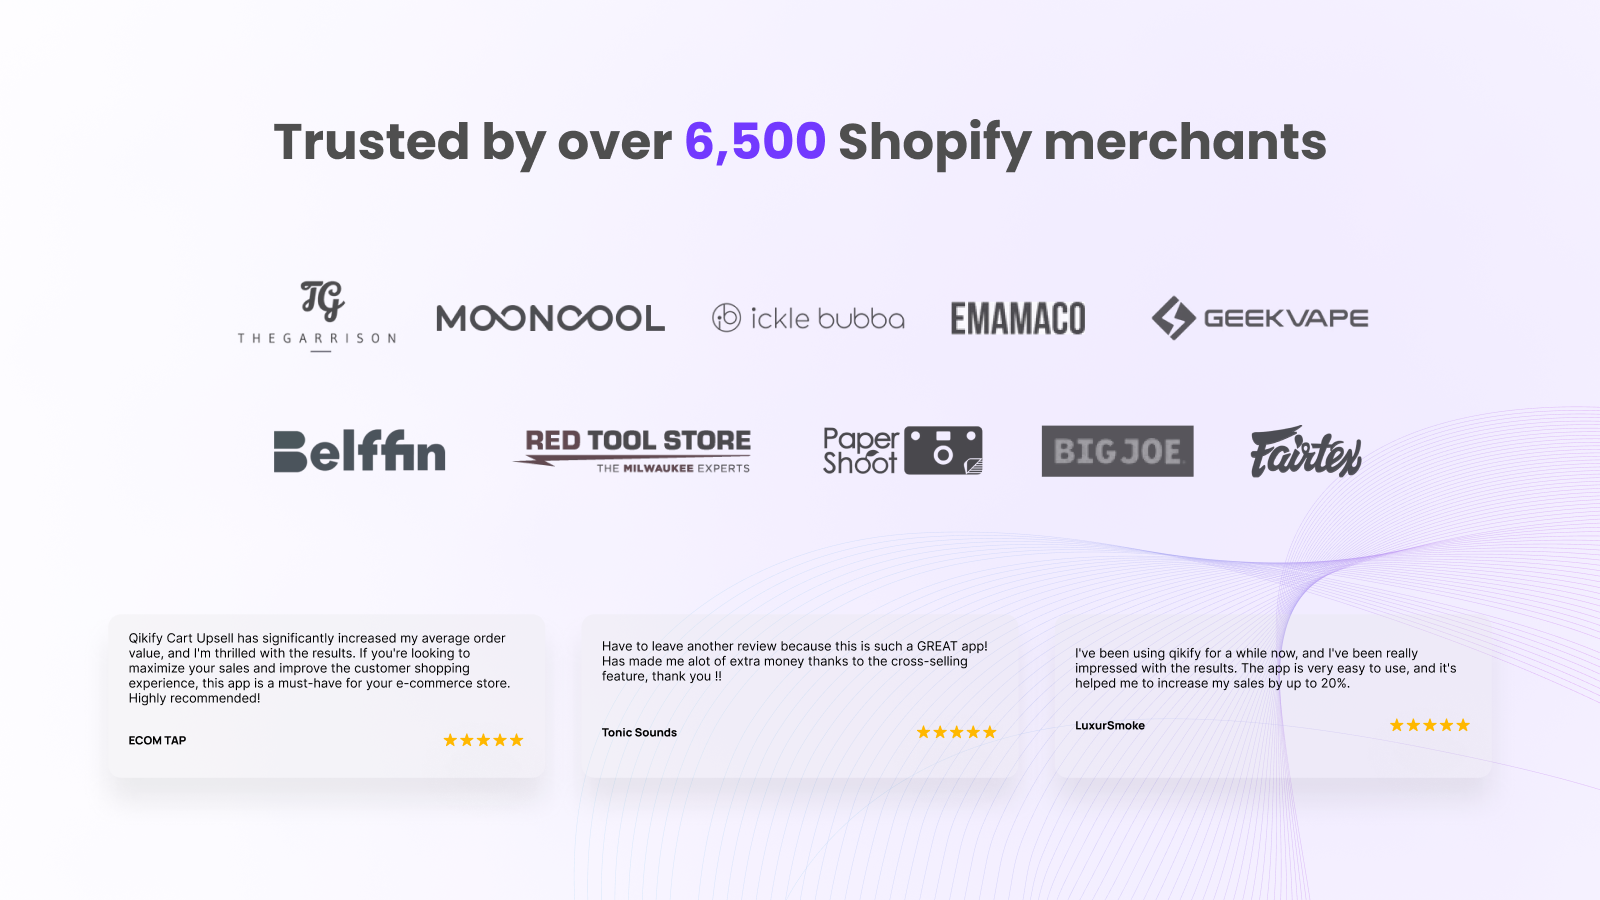 Qikify upsell is trusted by over 6500 merchants